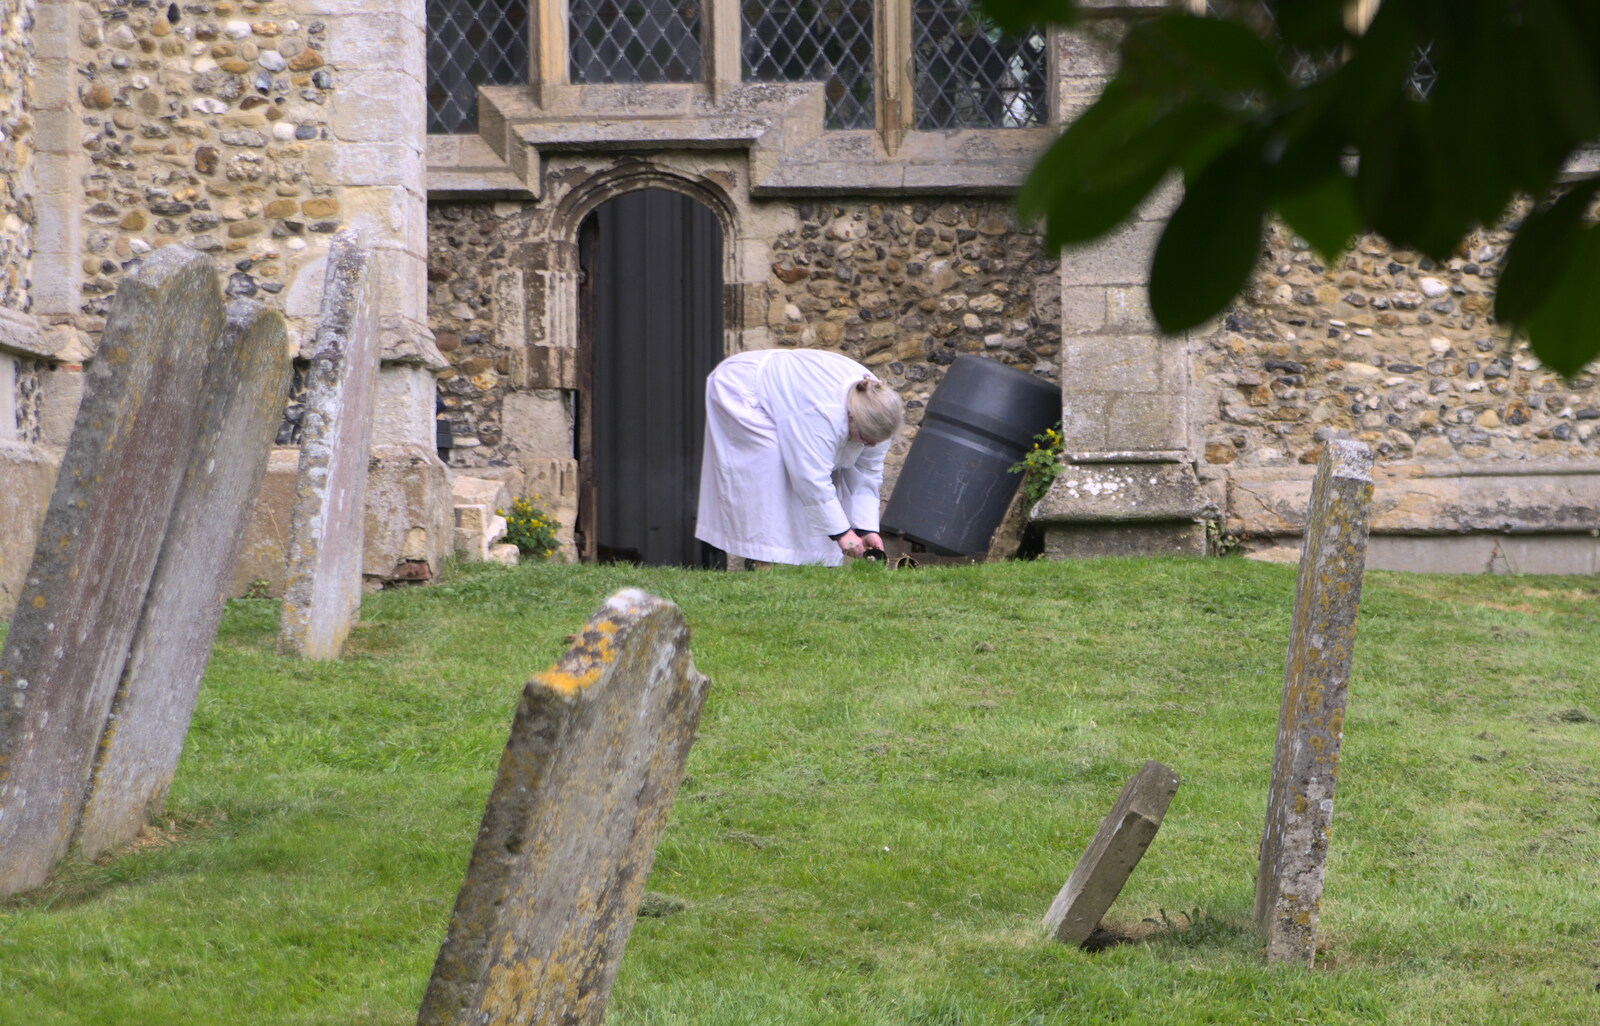 The vicar puts out the incense on the grass from A Postcard From Thaxted, Essex - 7th May 2017